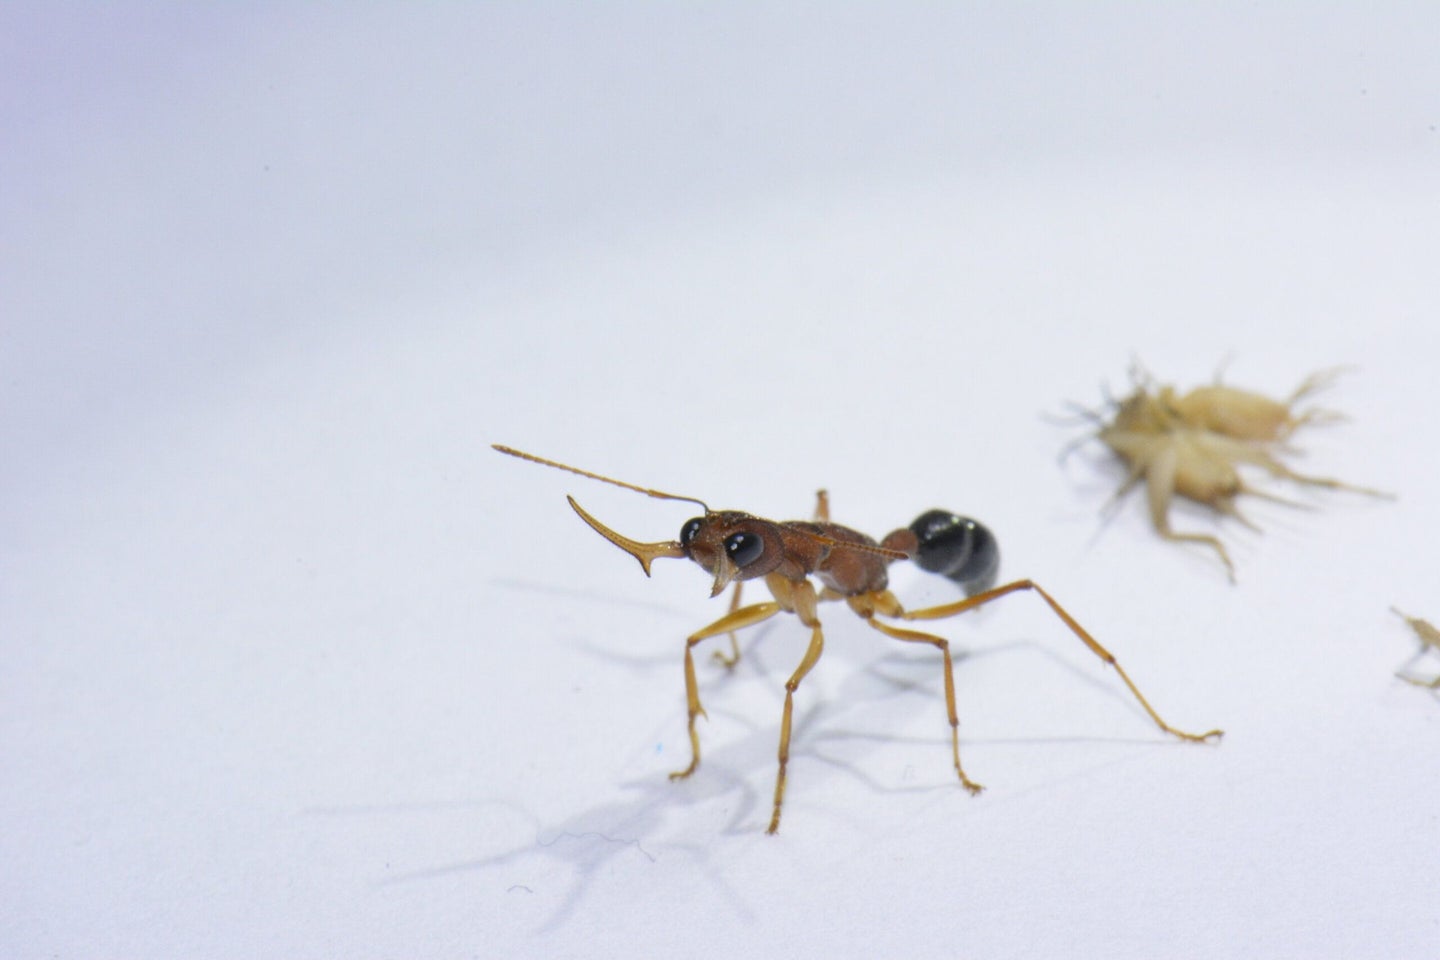 a worker ant in an aggressive stance against a white background